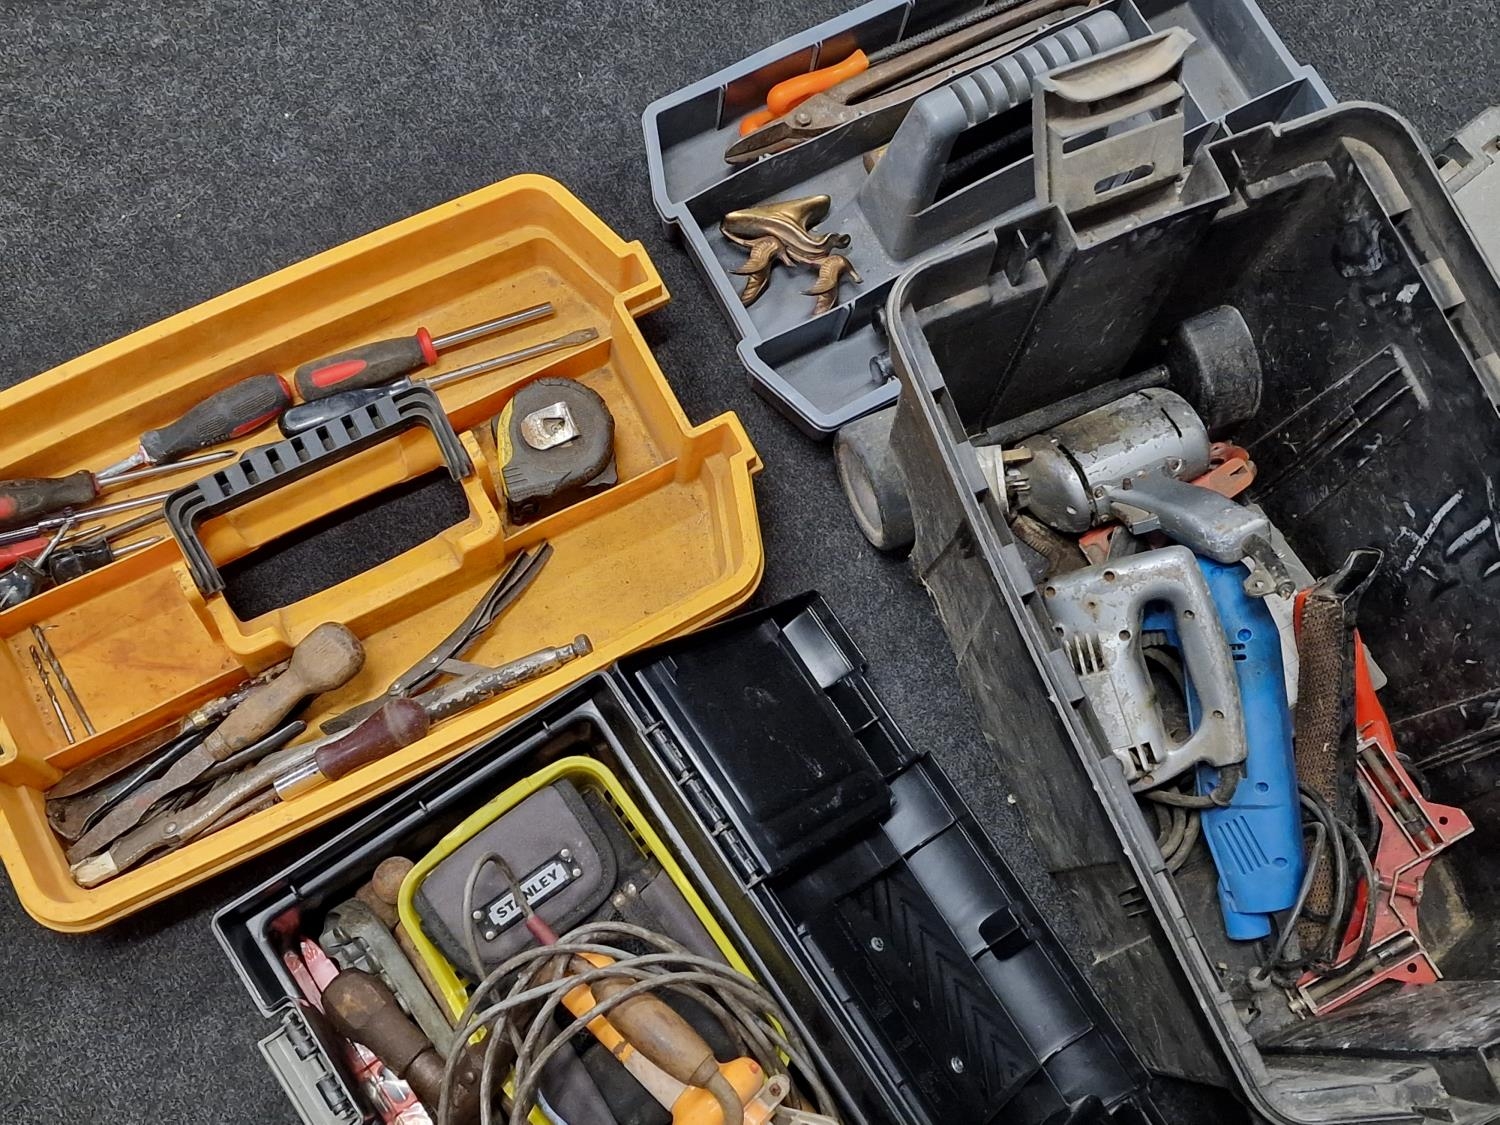 Two toolboxes containing a collection of vintage tools. - Image 2 of 2